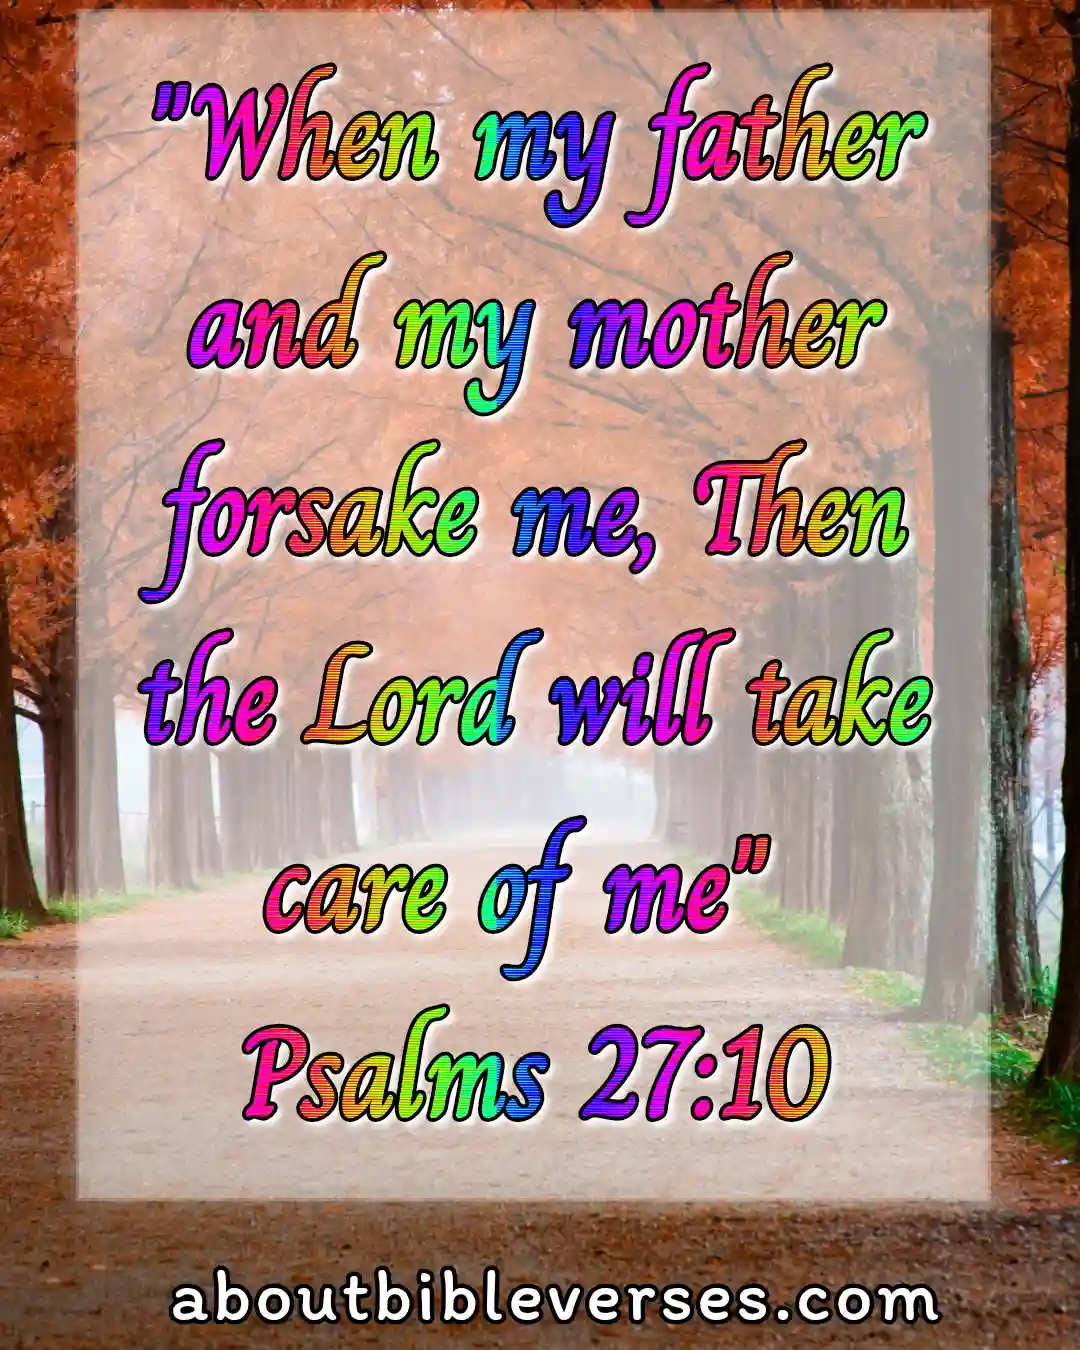 Bible Verses God Is With You (Psalm 27:10)